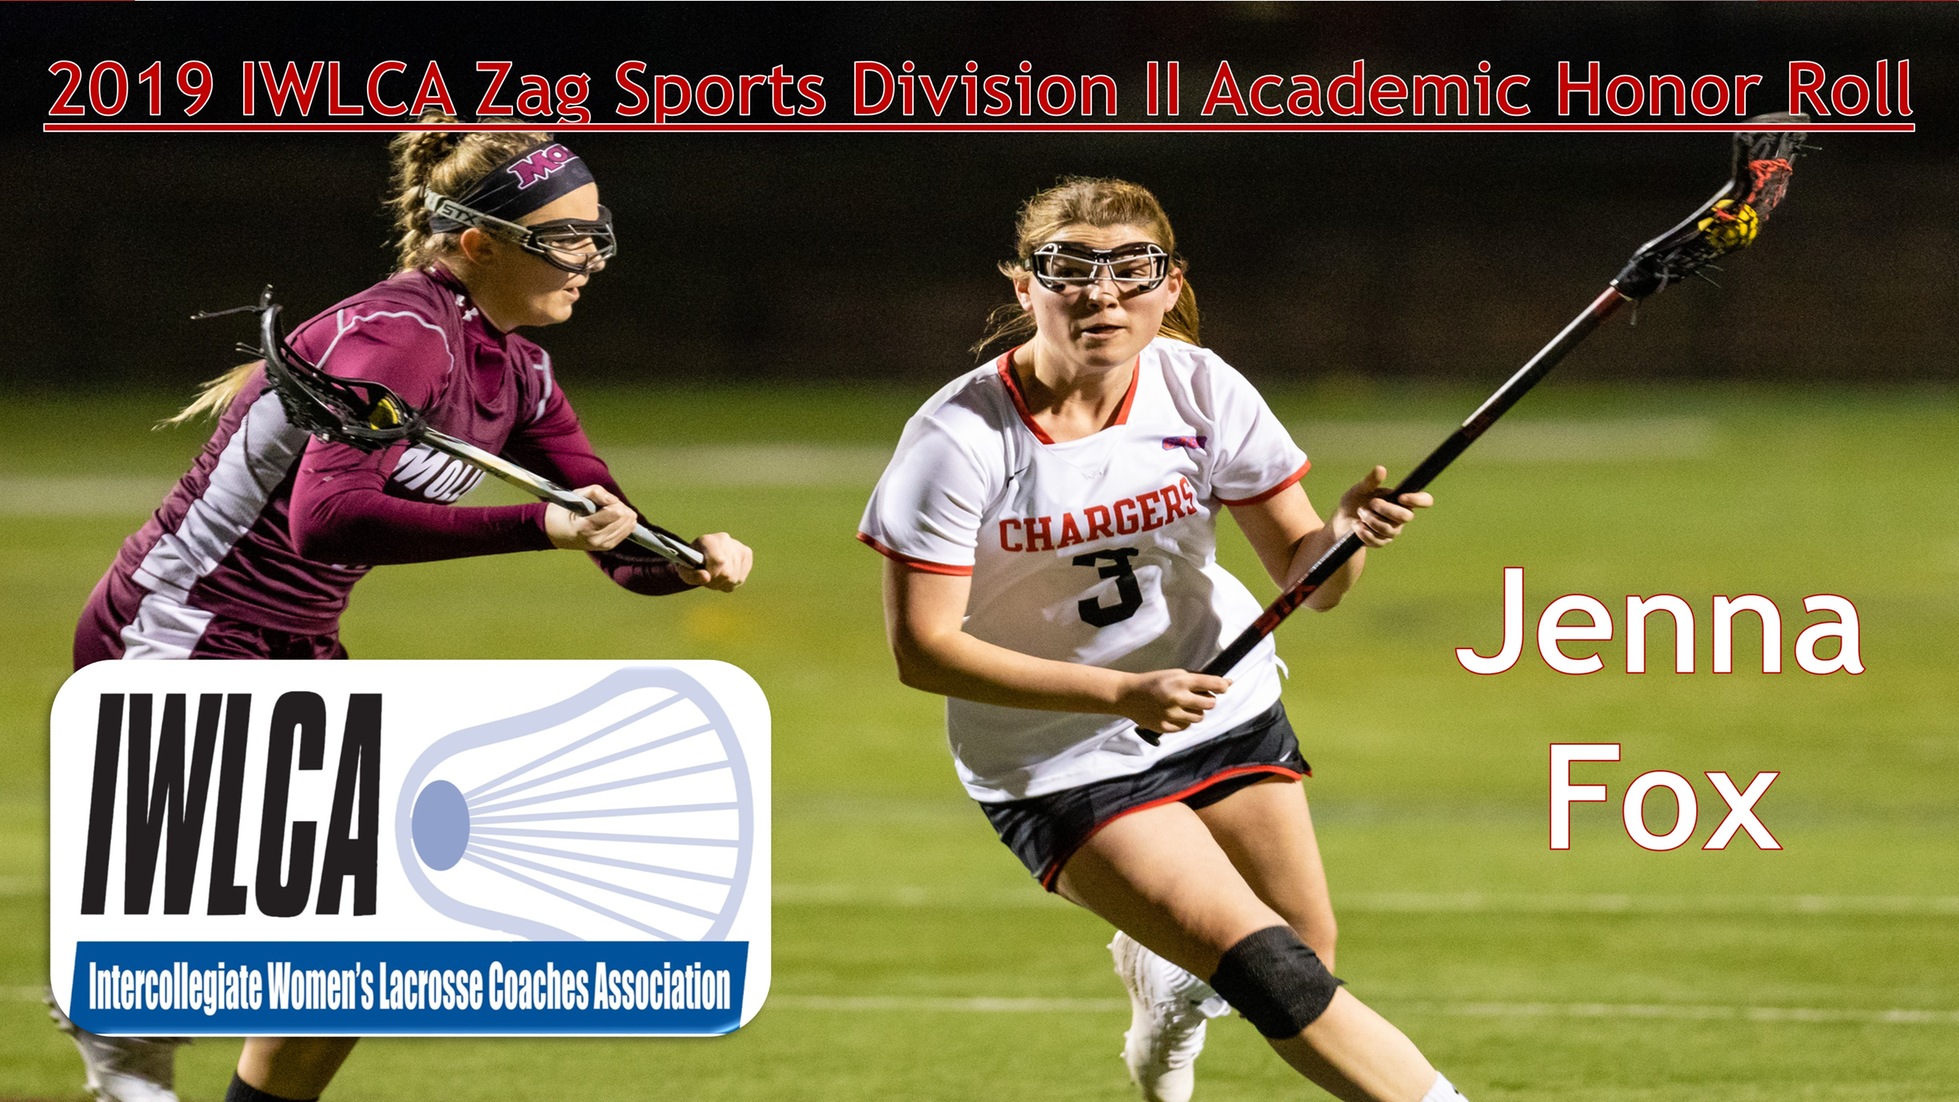 FOX NAMED TO IWLCA 2019 ZAG SPORTS DIVISION II ACADEMIC HONOR ROLL